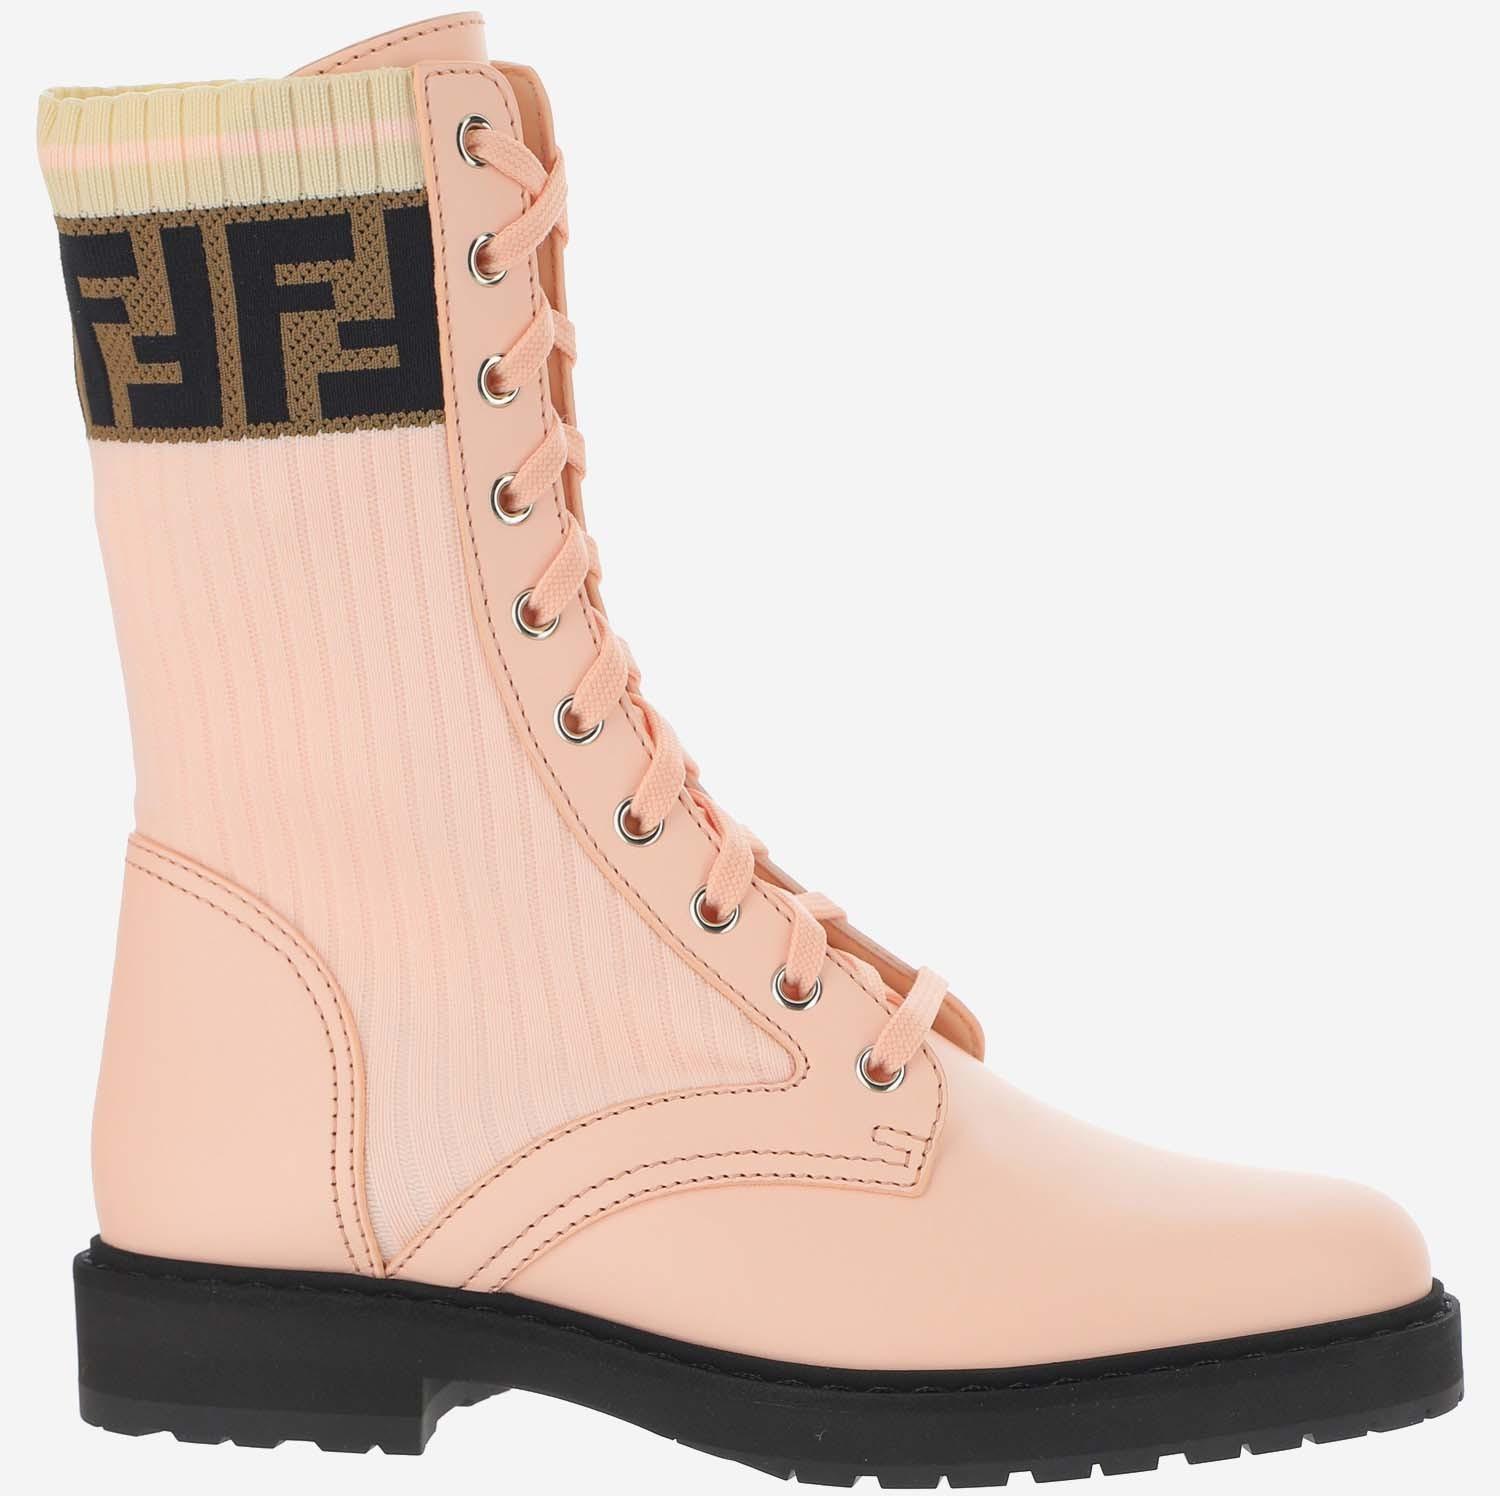 Fendi Pink Leather and Fabric Ankle Boots 36 IT/EU at FORZIERI